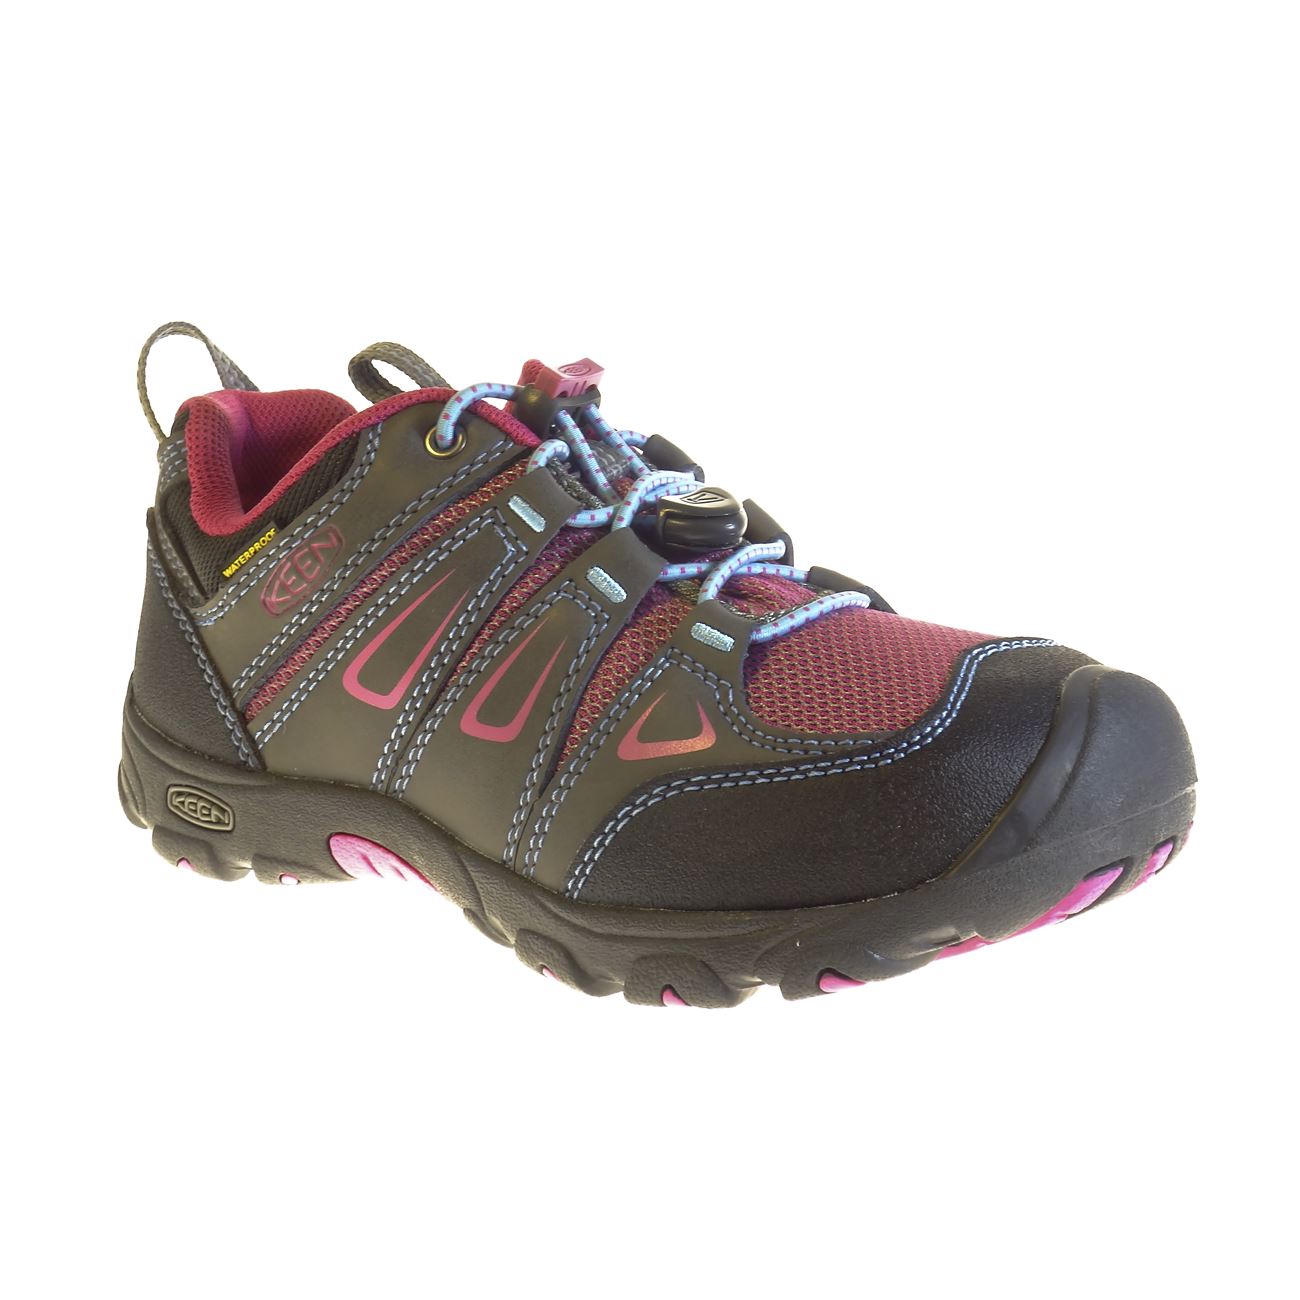 KEEN, Oakridge Low WP, Youth, Magnet/Very Berry Shoes Keen Magnet/Very Berry 1 